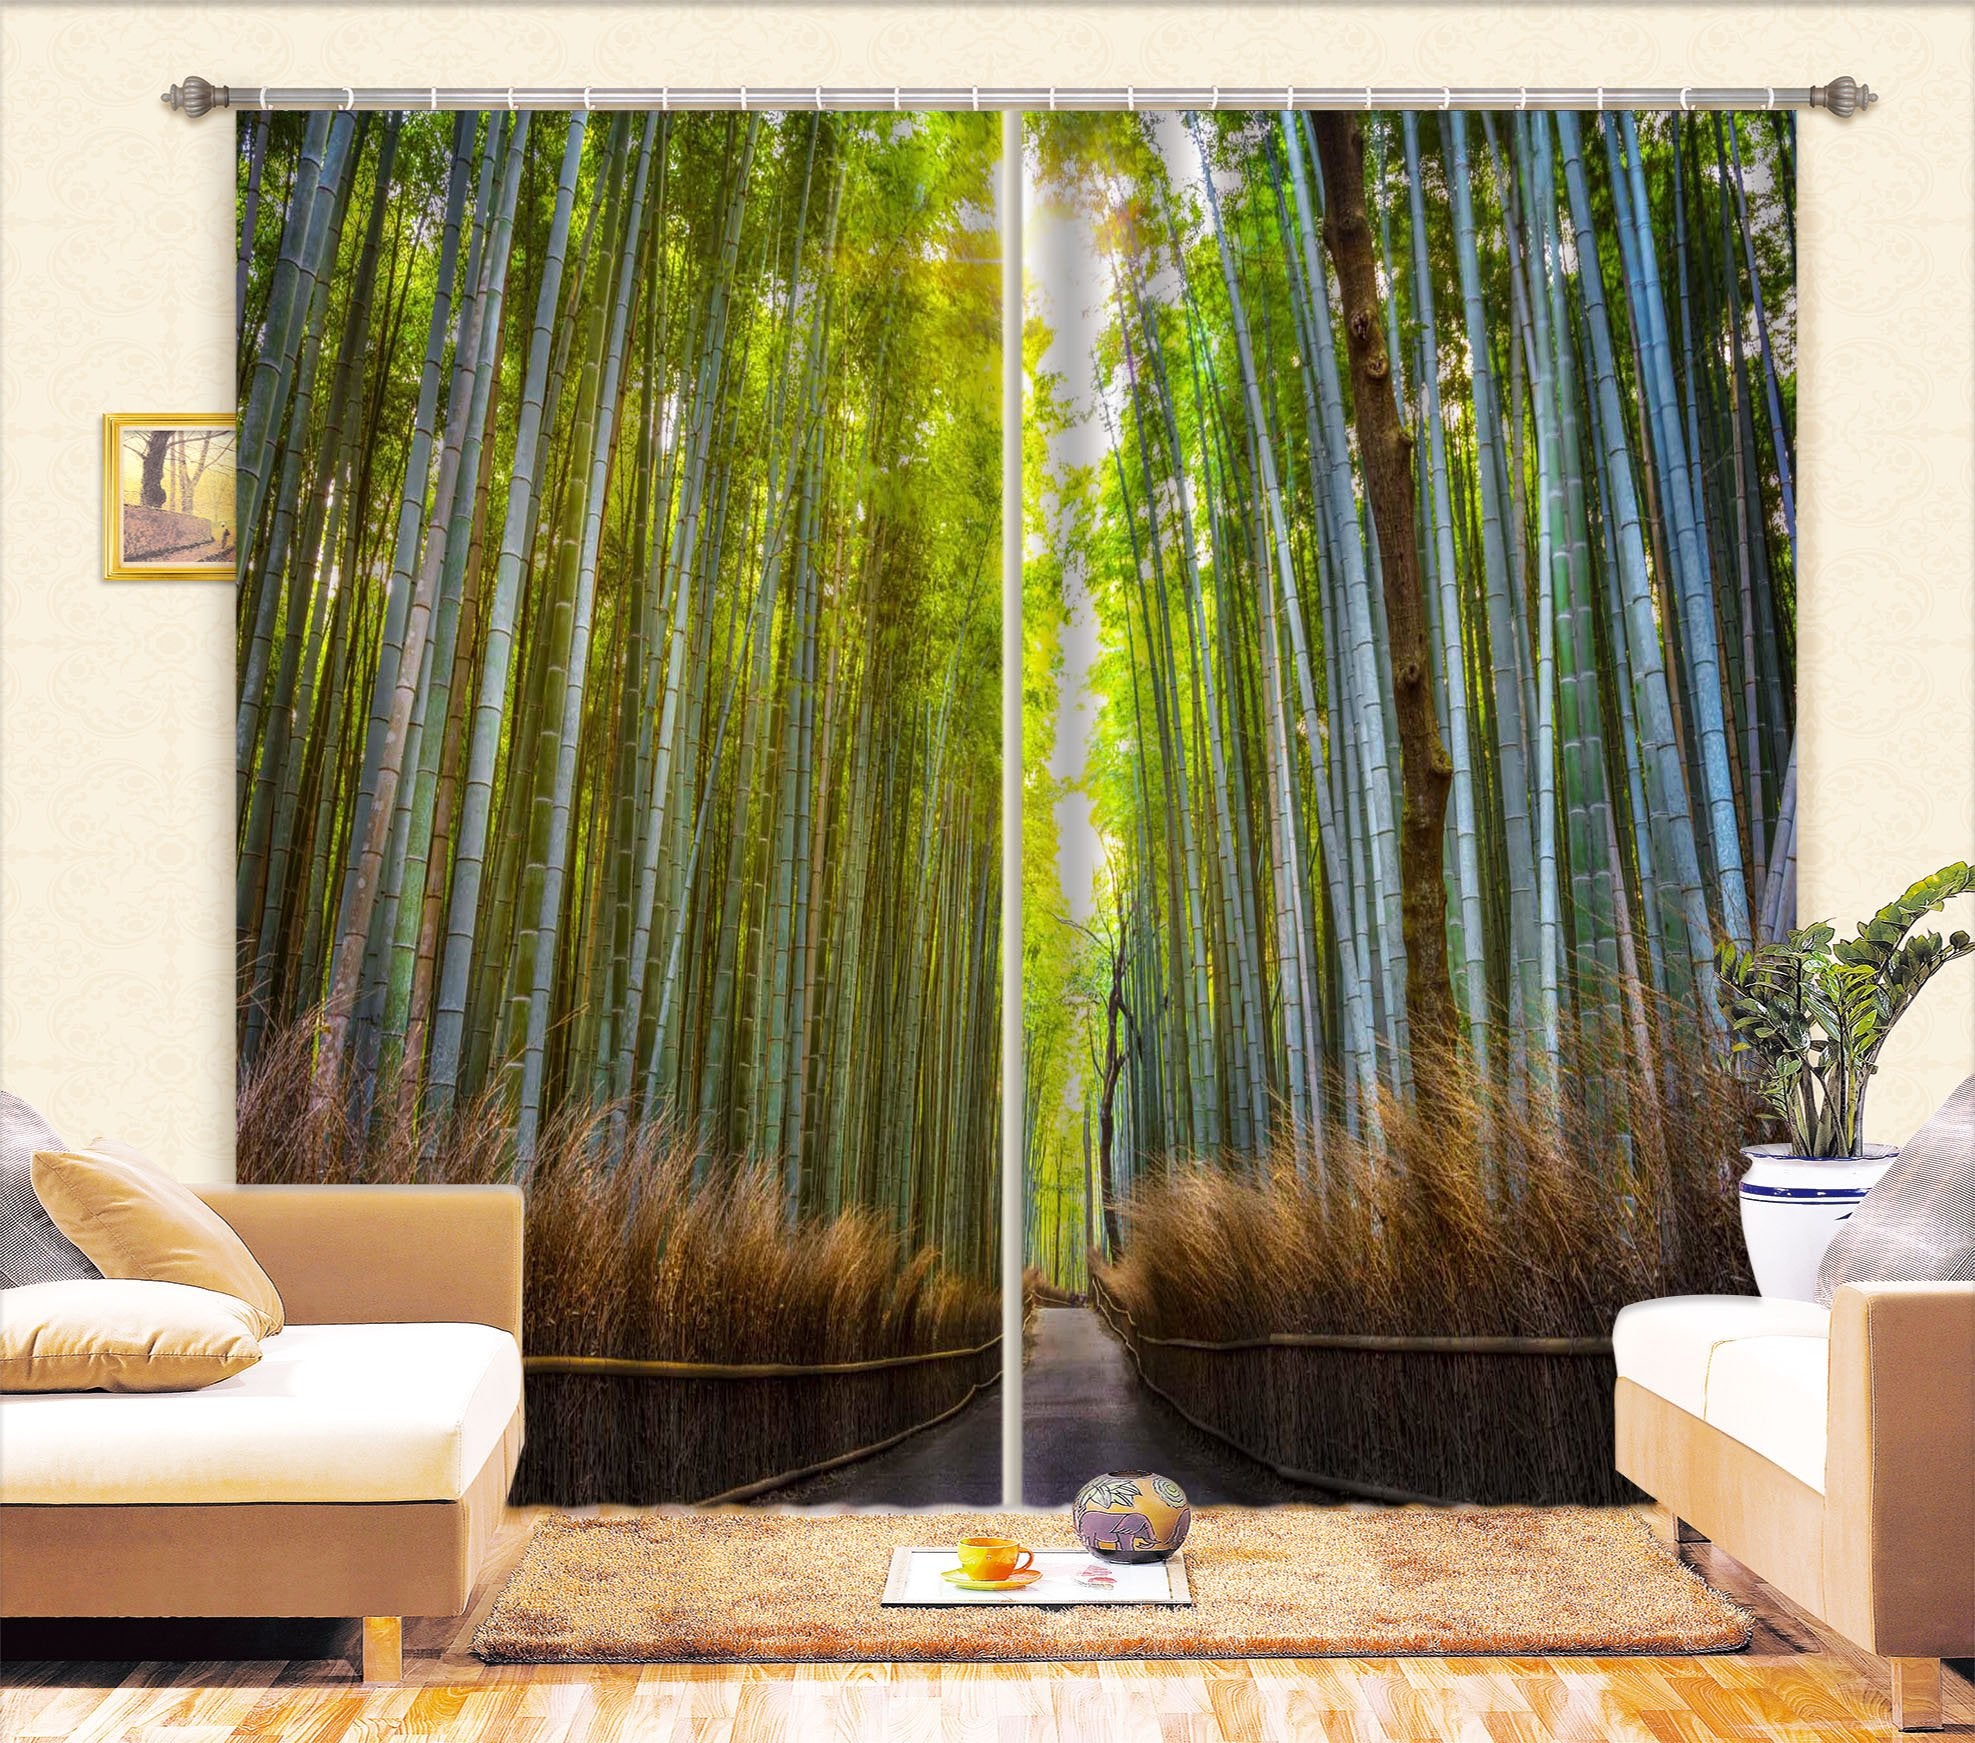 3D Bamboo Forest 079 Marco Carmassi Curtain Curtains Drapes Wallpaper AJ Wallpaper 